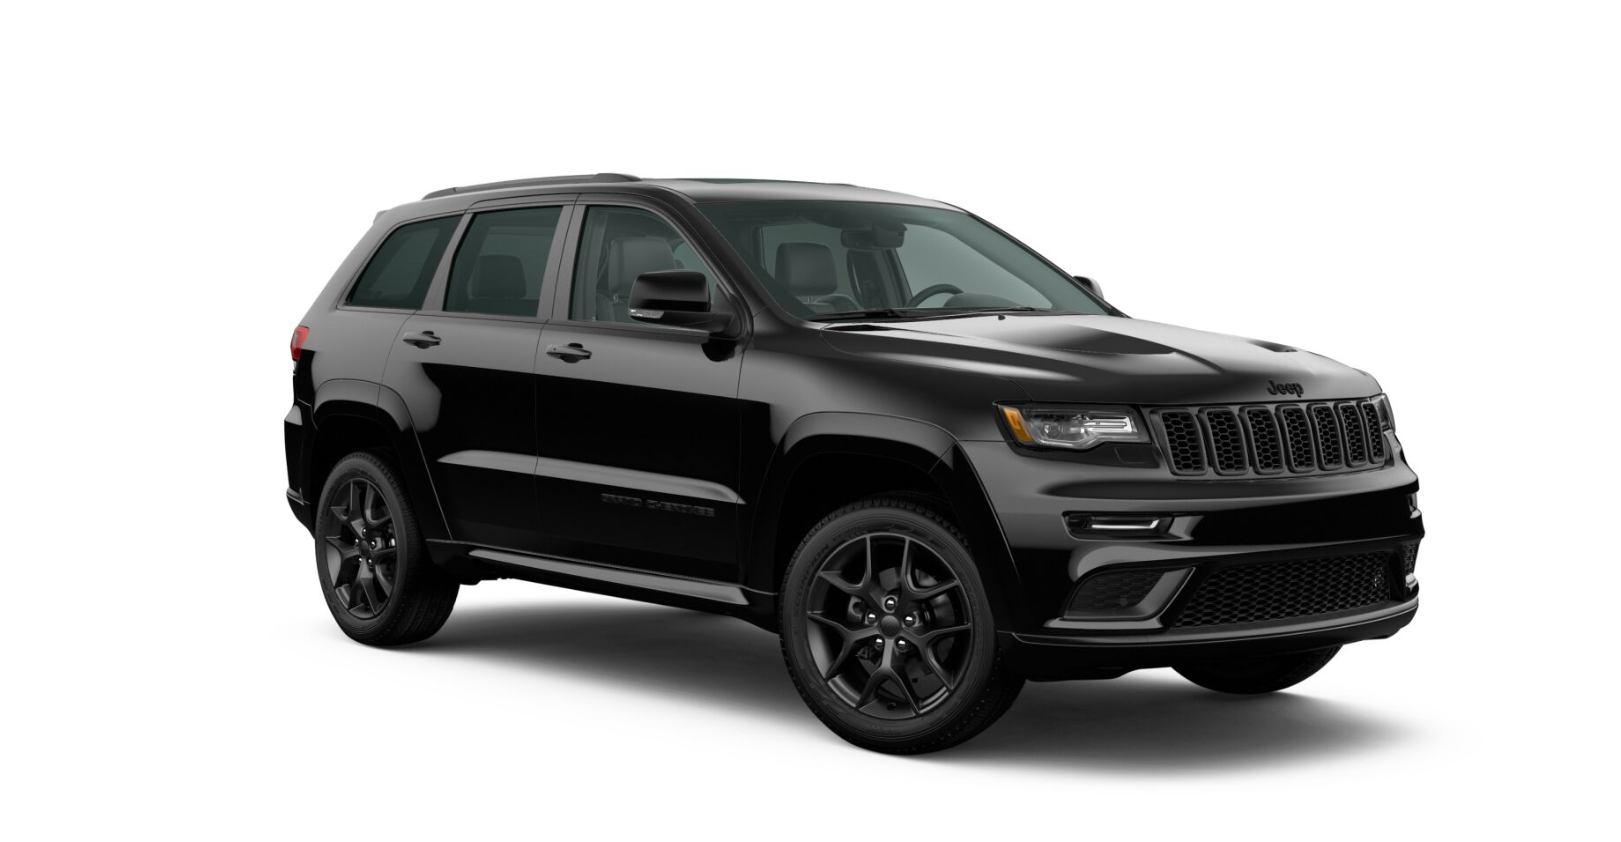 2021 jeep grand cherokee limited features